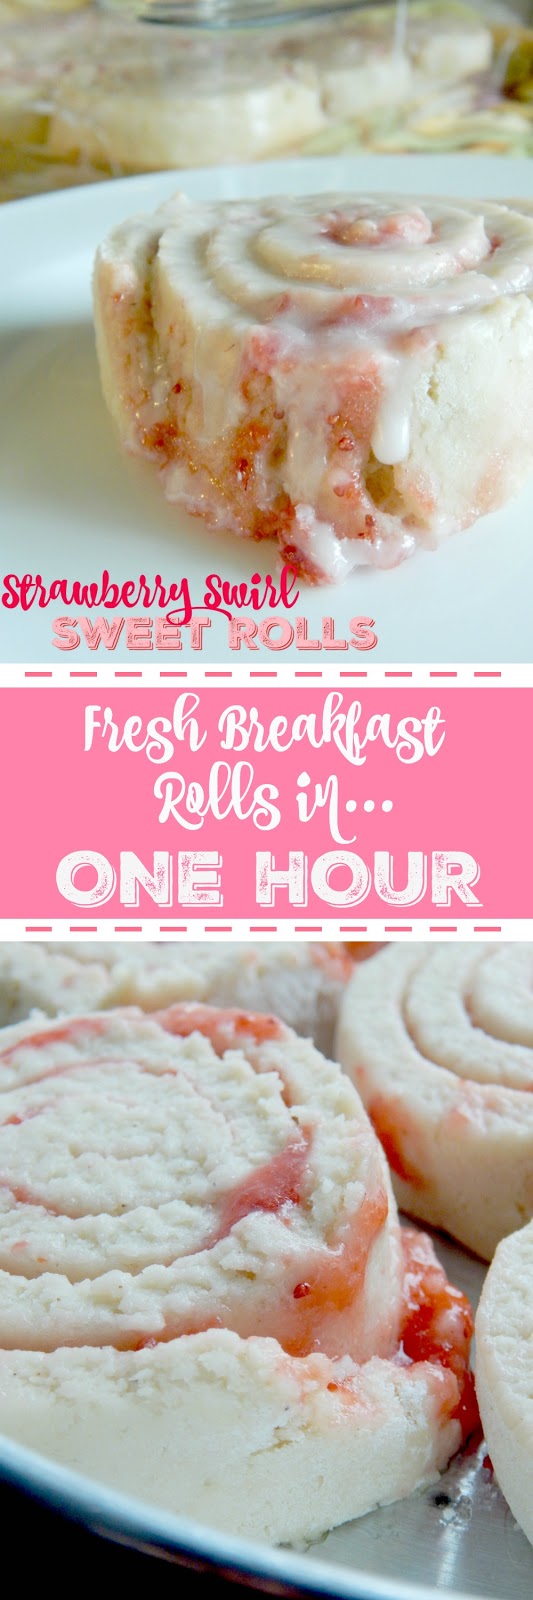 Strawberry Swirl Sweet Rolls...ready in ONE HOUR!  Sweet strawberry jam, filled into between soft dough, then glazed with a sweet almond frosting! (sweetandsavoryfood.com)